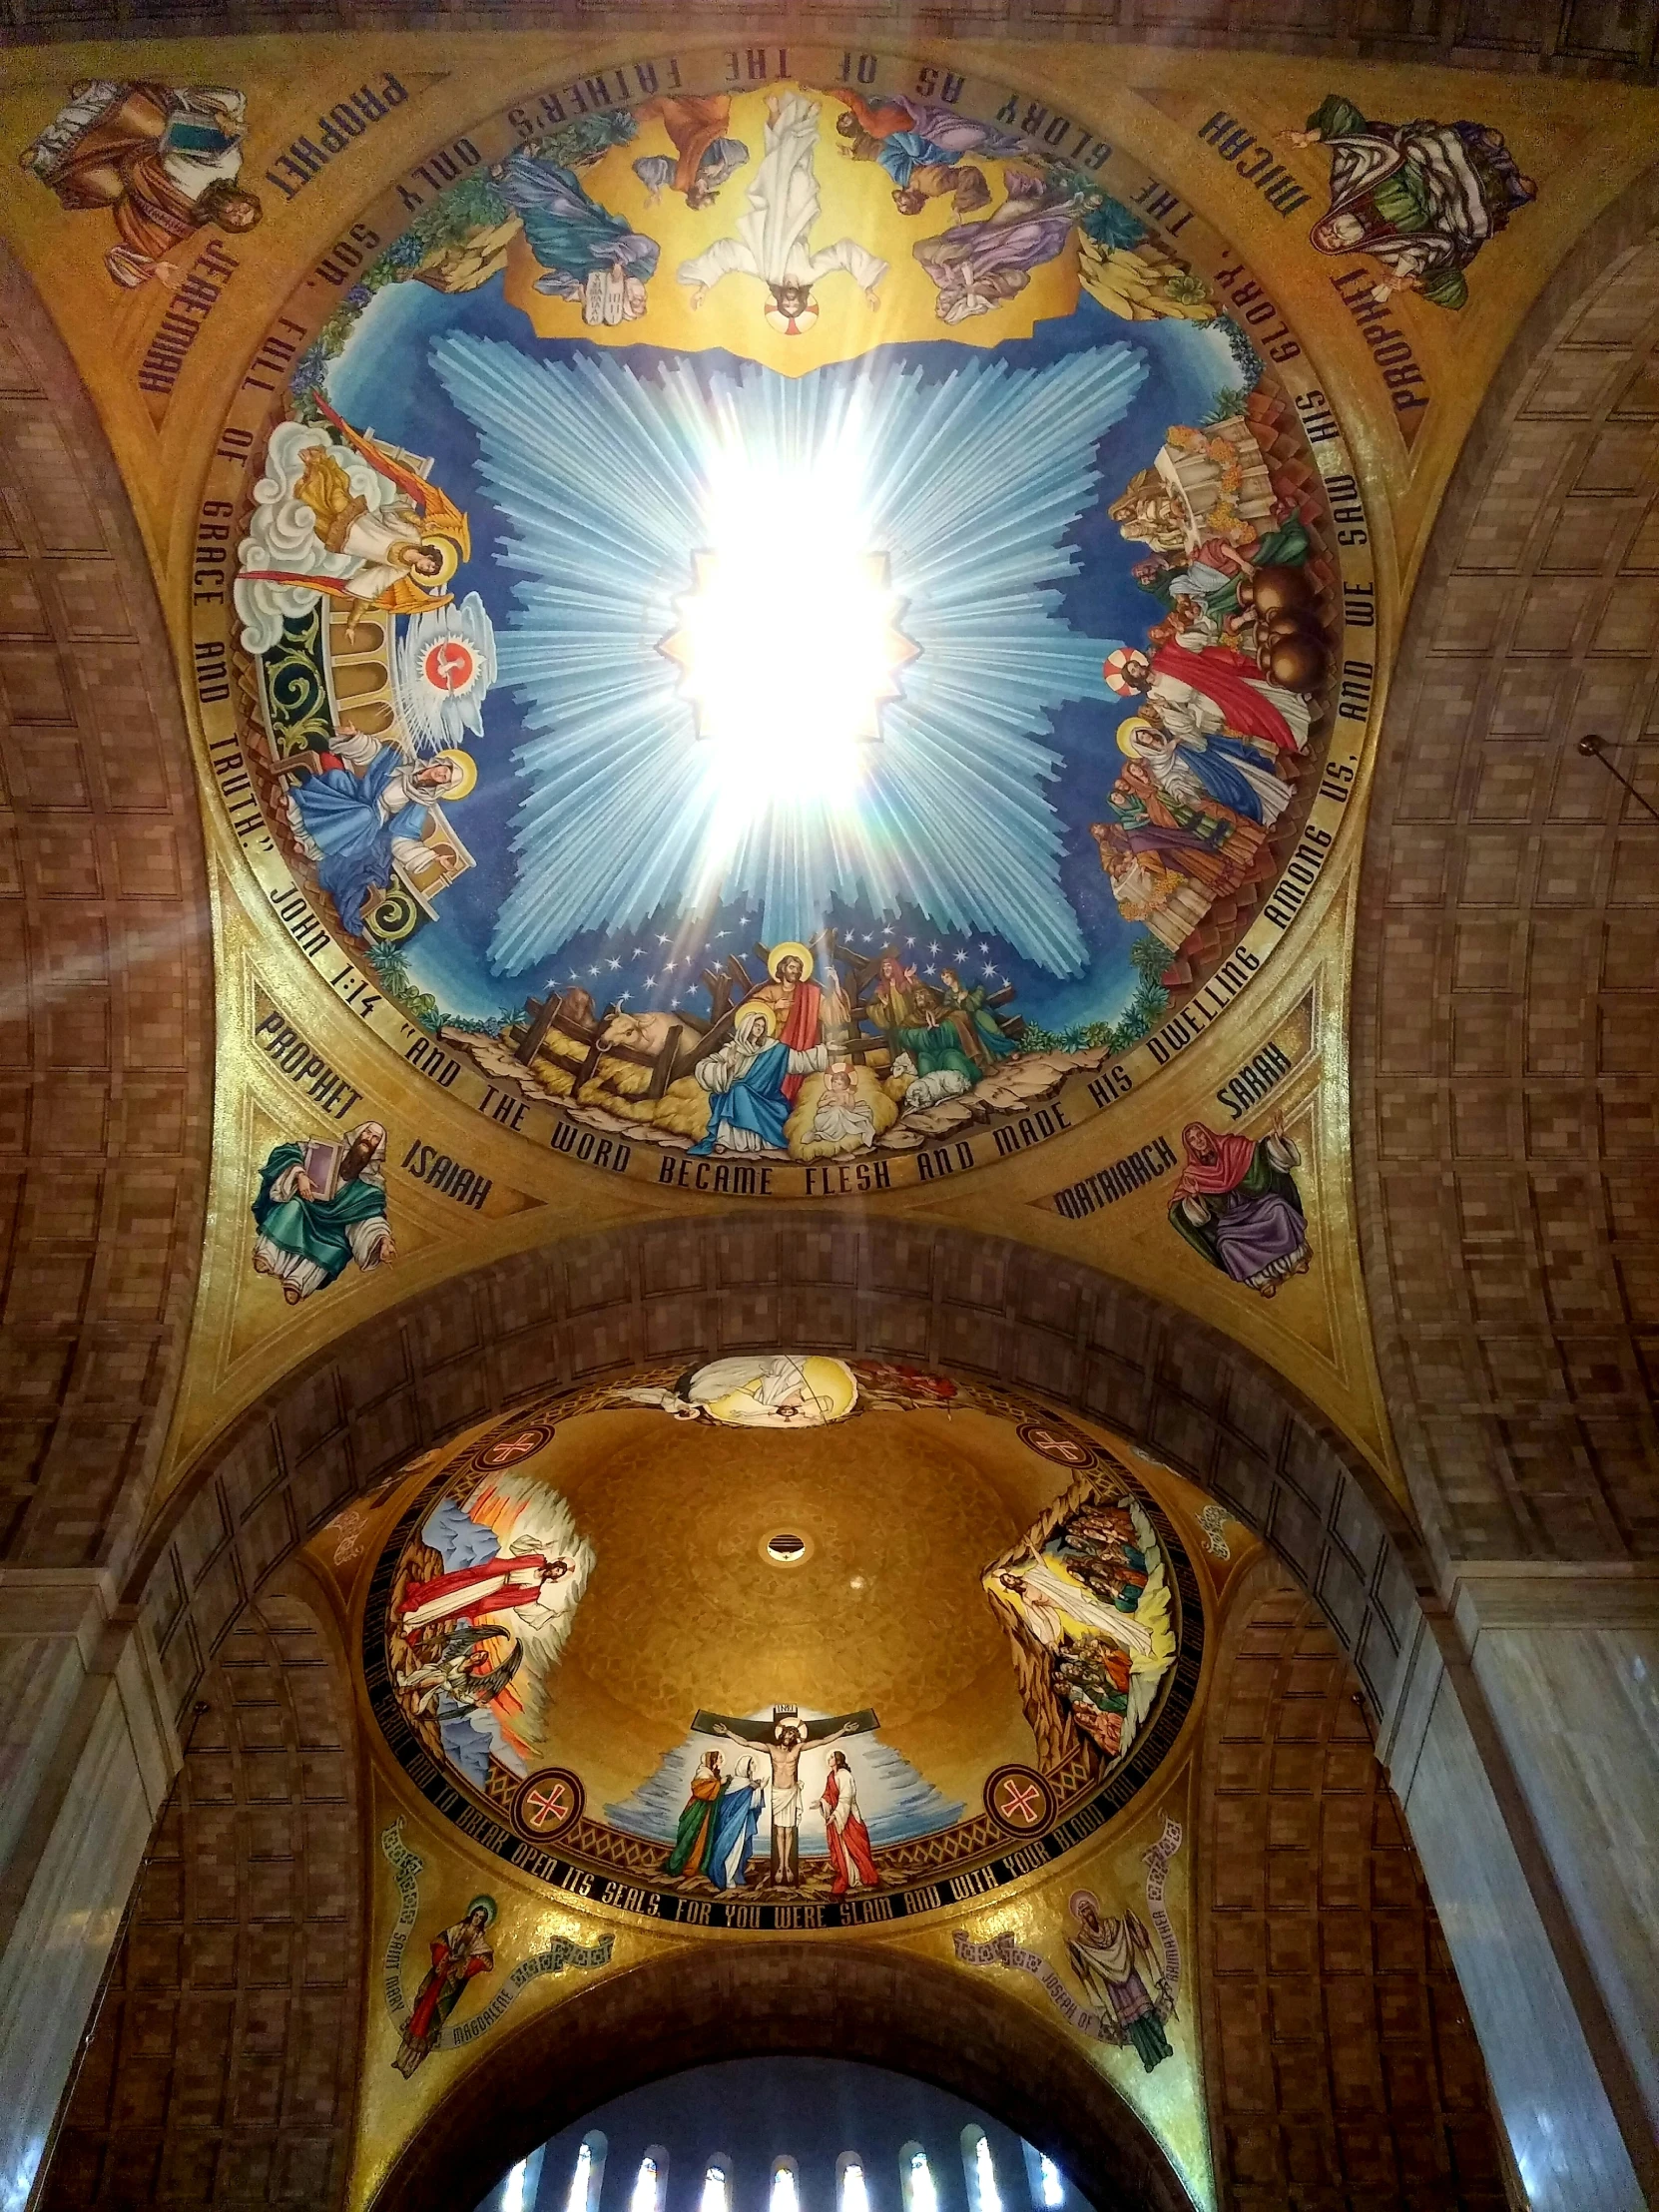 a close up view of a domed ceiling with paintings